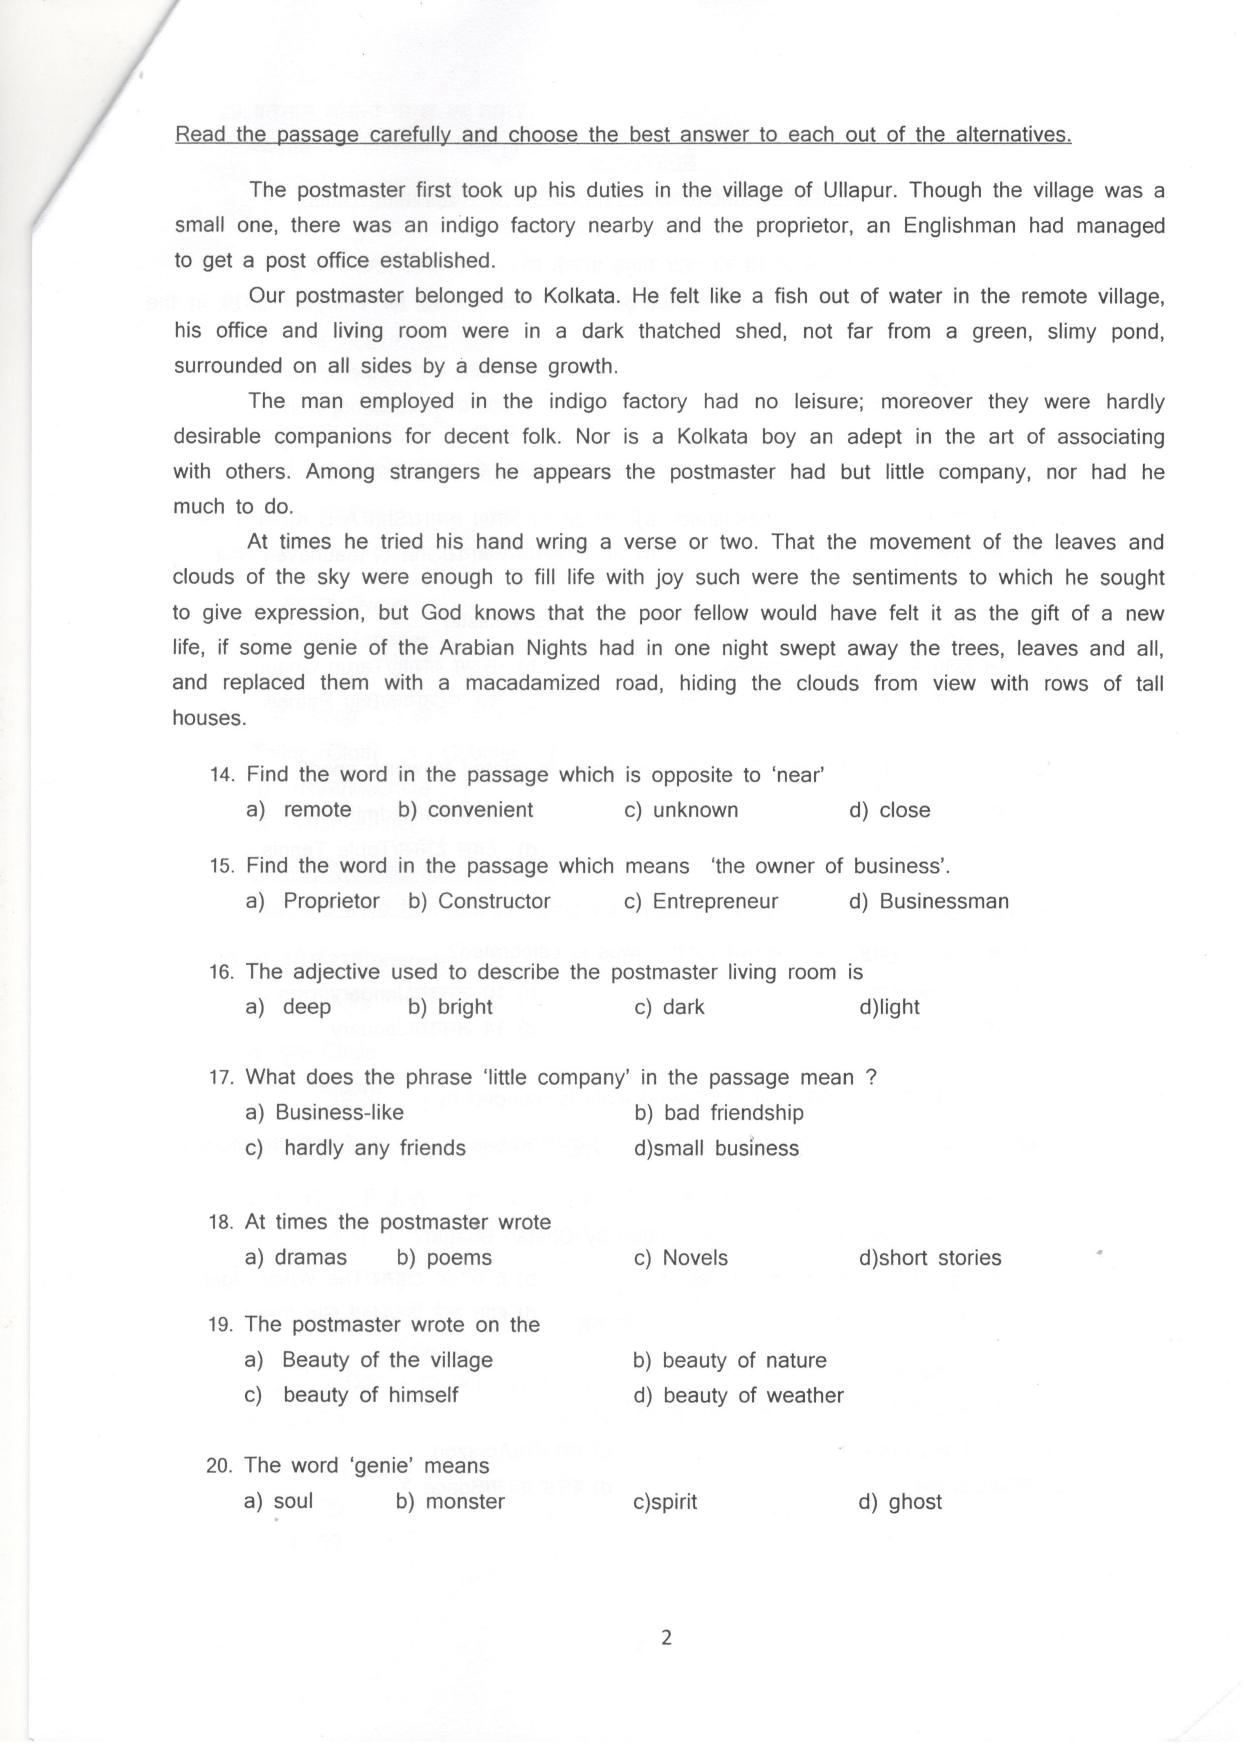 LPSC Hindi Typist 2018 Question Paper - Page 3